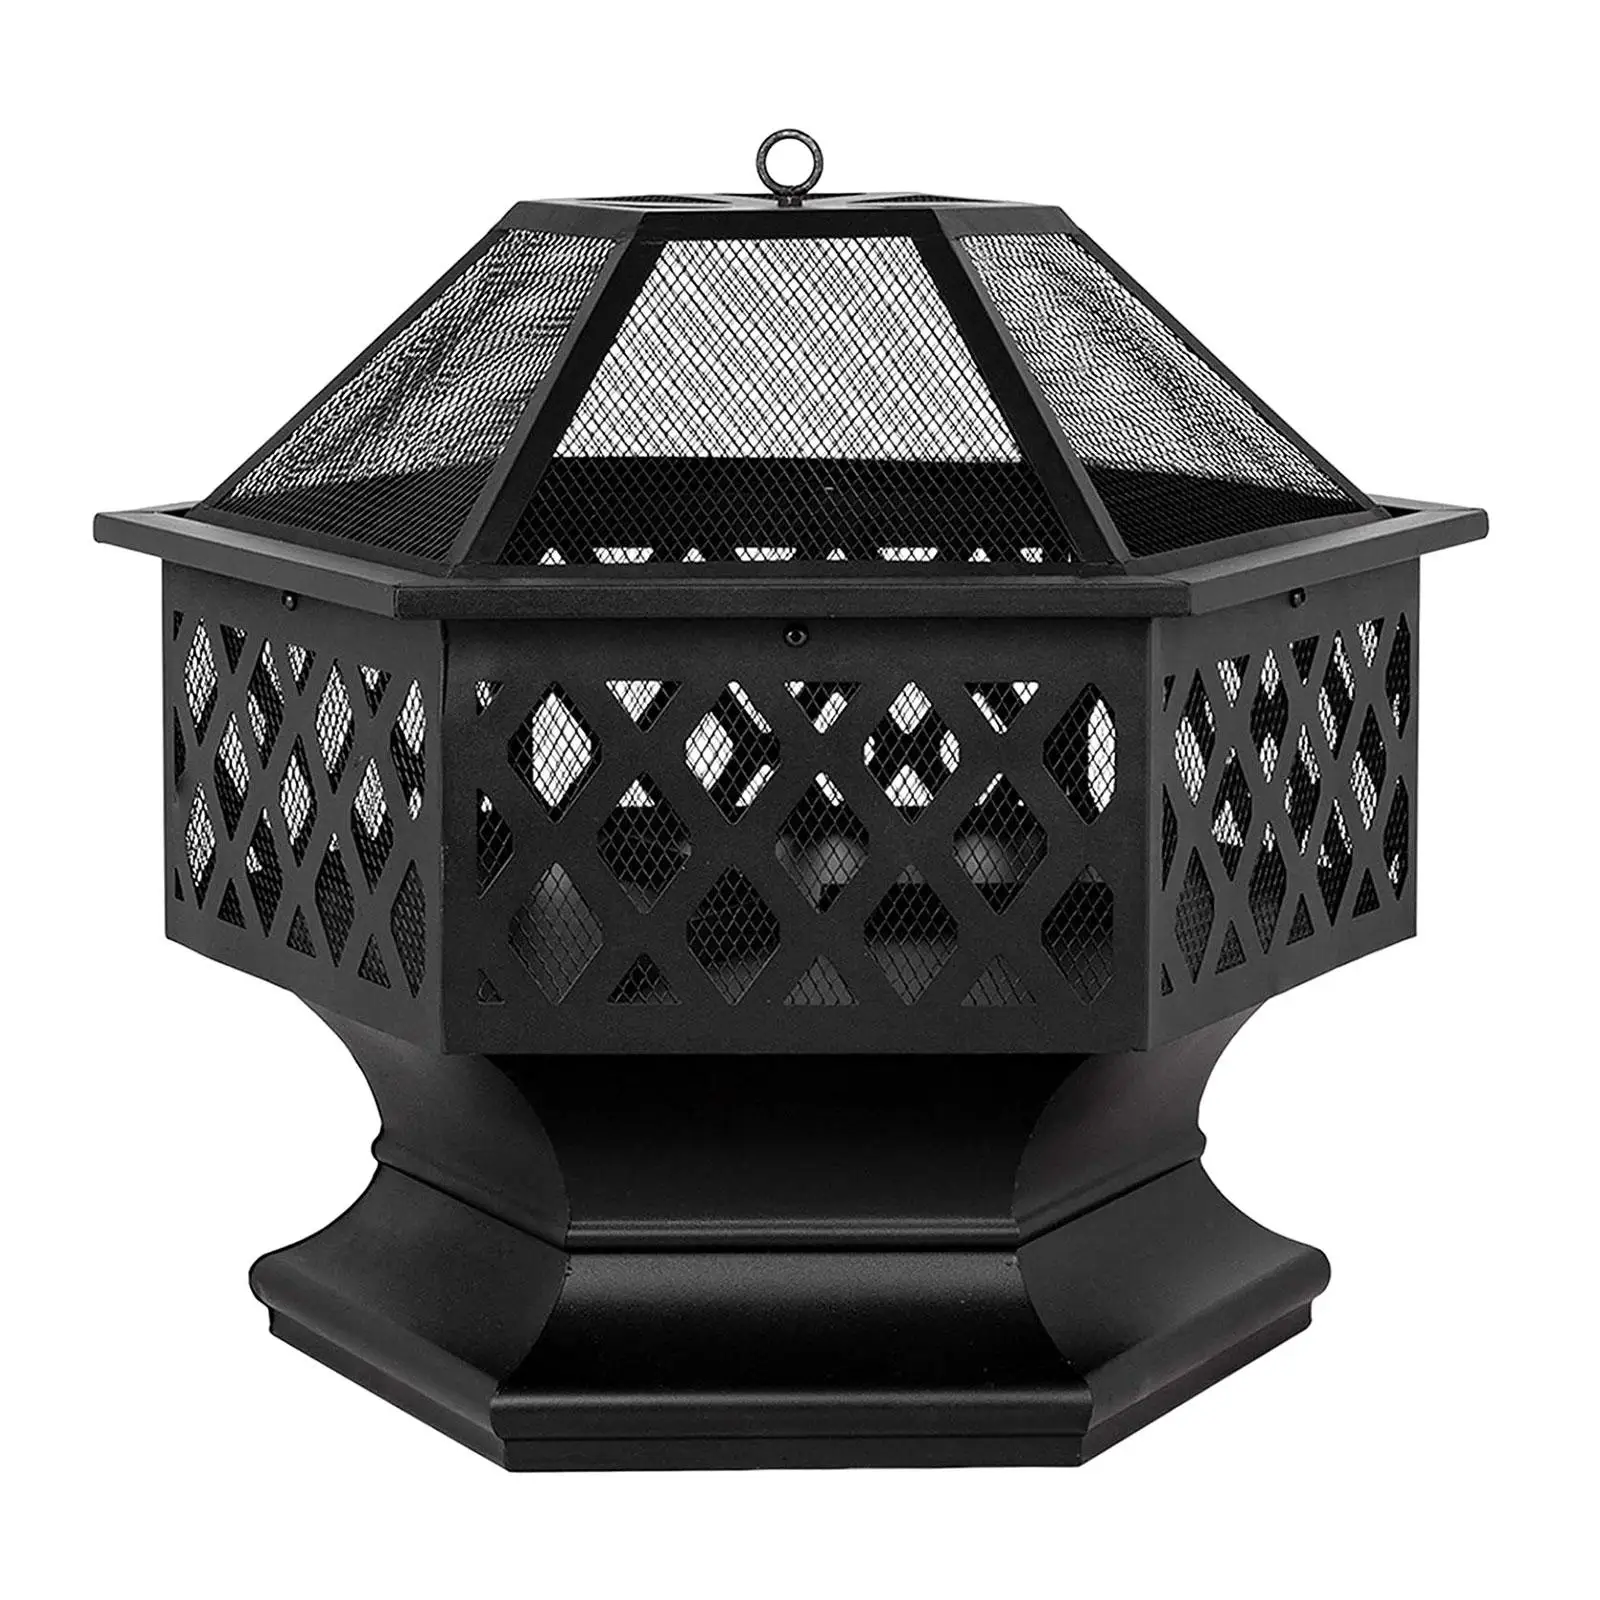 Outdoor Fire pits Round Lattice firepit Patio Heater for Barbecue Camping